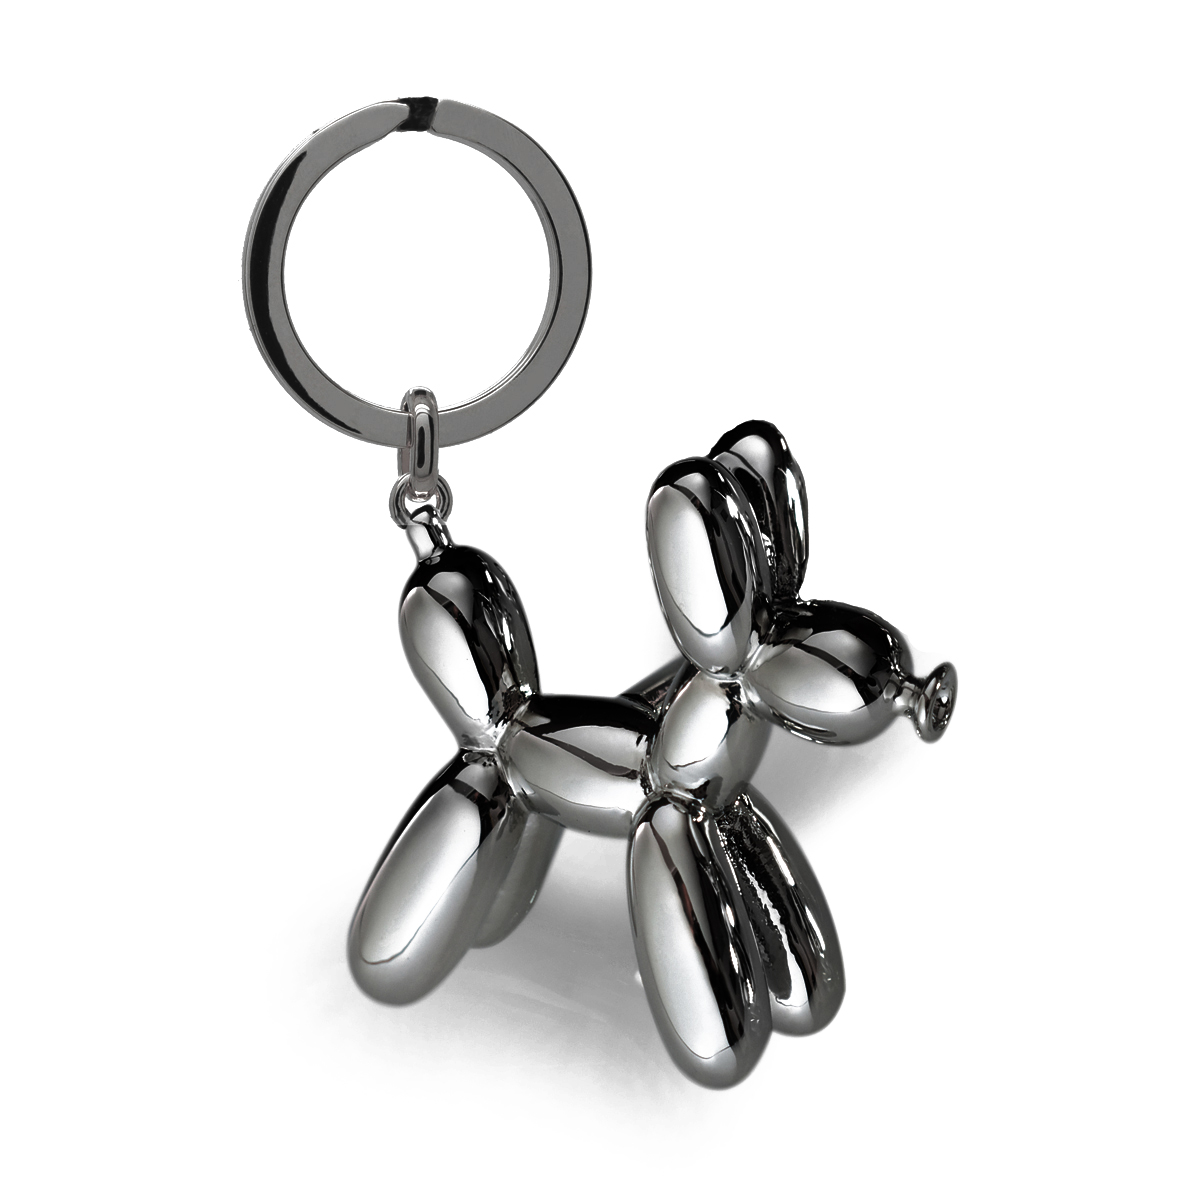 Balloon Dog Keychain – A. L. Party Balloons